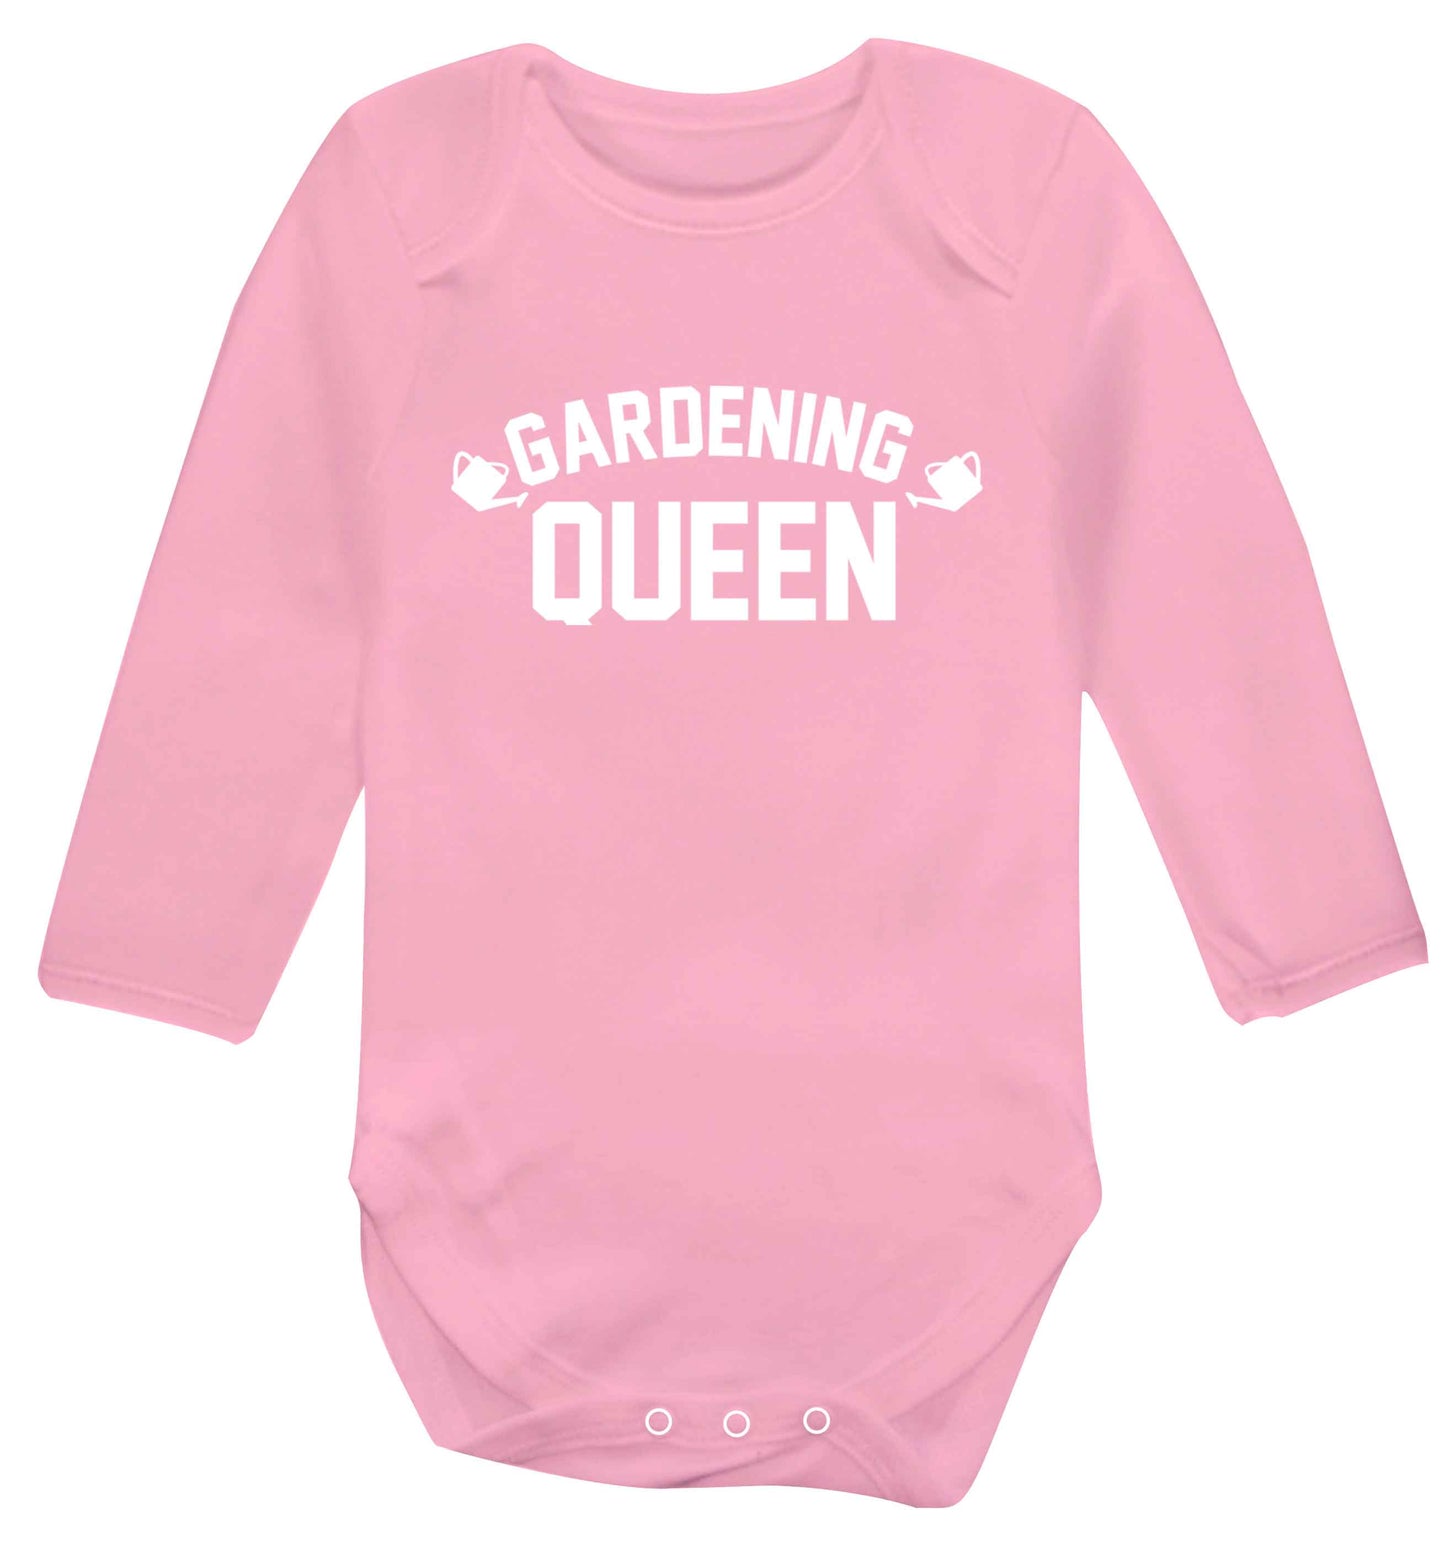 Gardening queen Baby Vest long sleeved pale pink 6-12 months